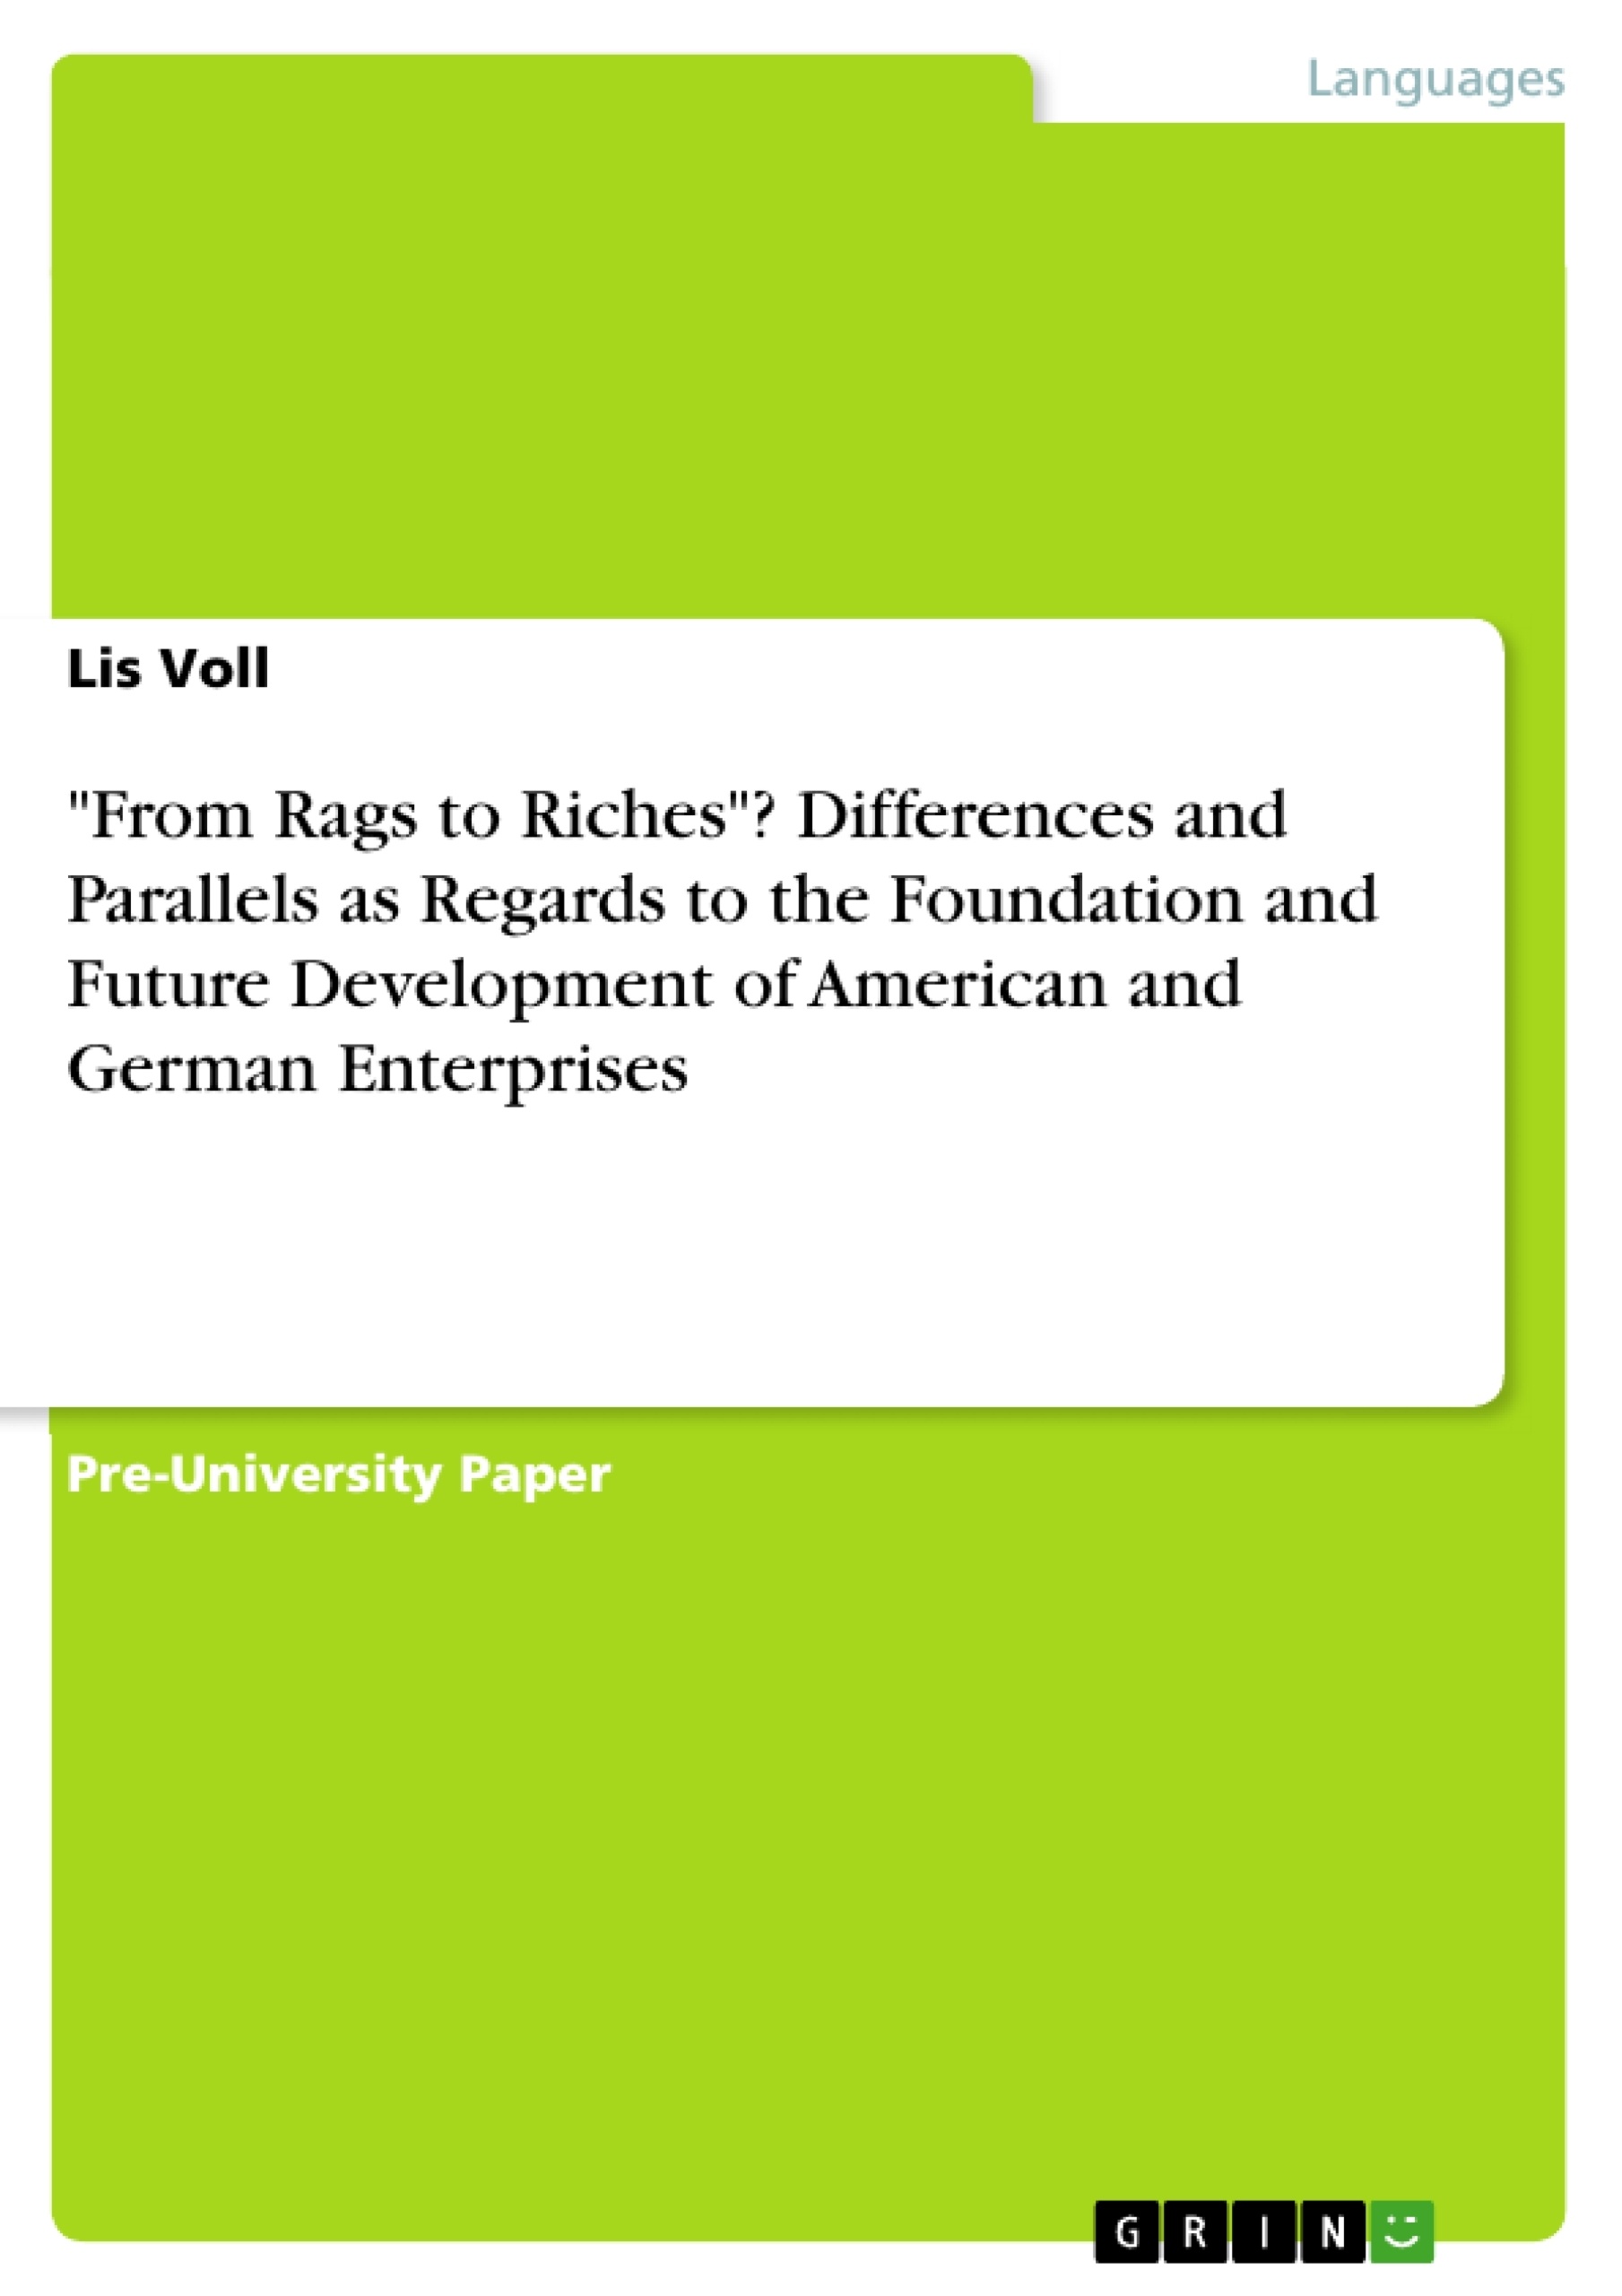 Title: "From Rags to Riches"? Differences and Parallels as Regards to the Foundation and Future Development of American and German Enterprises